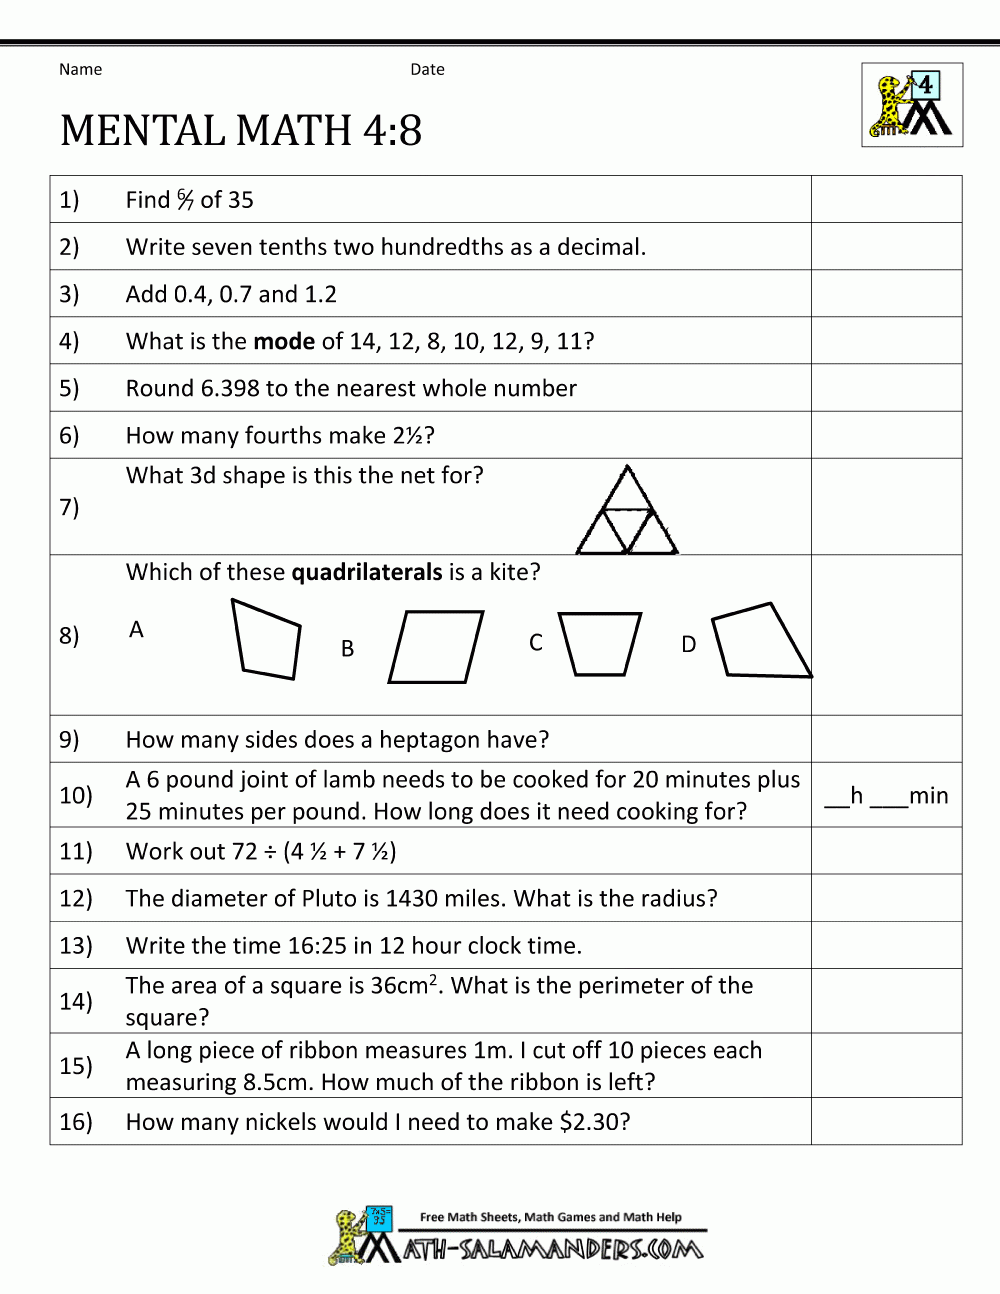 Online Math Test For 4th Graders Mona Conley s Addition Worksheets